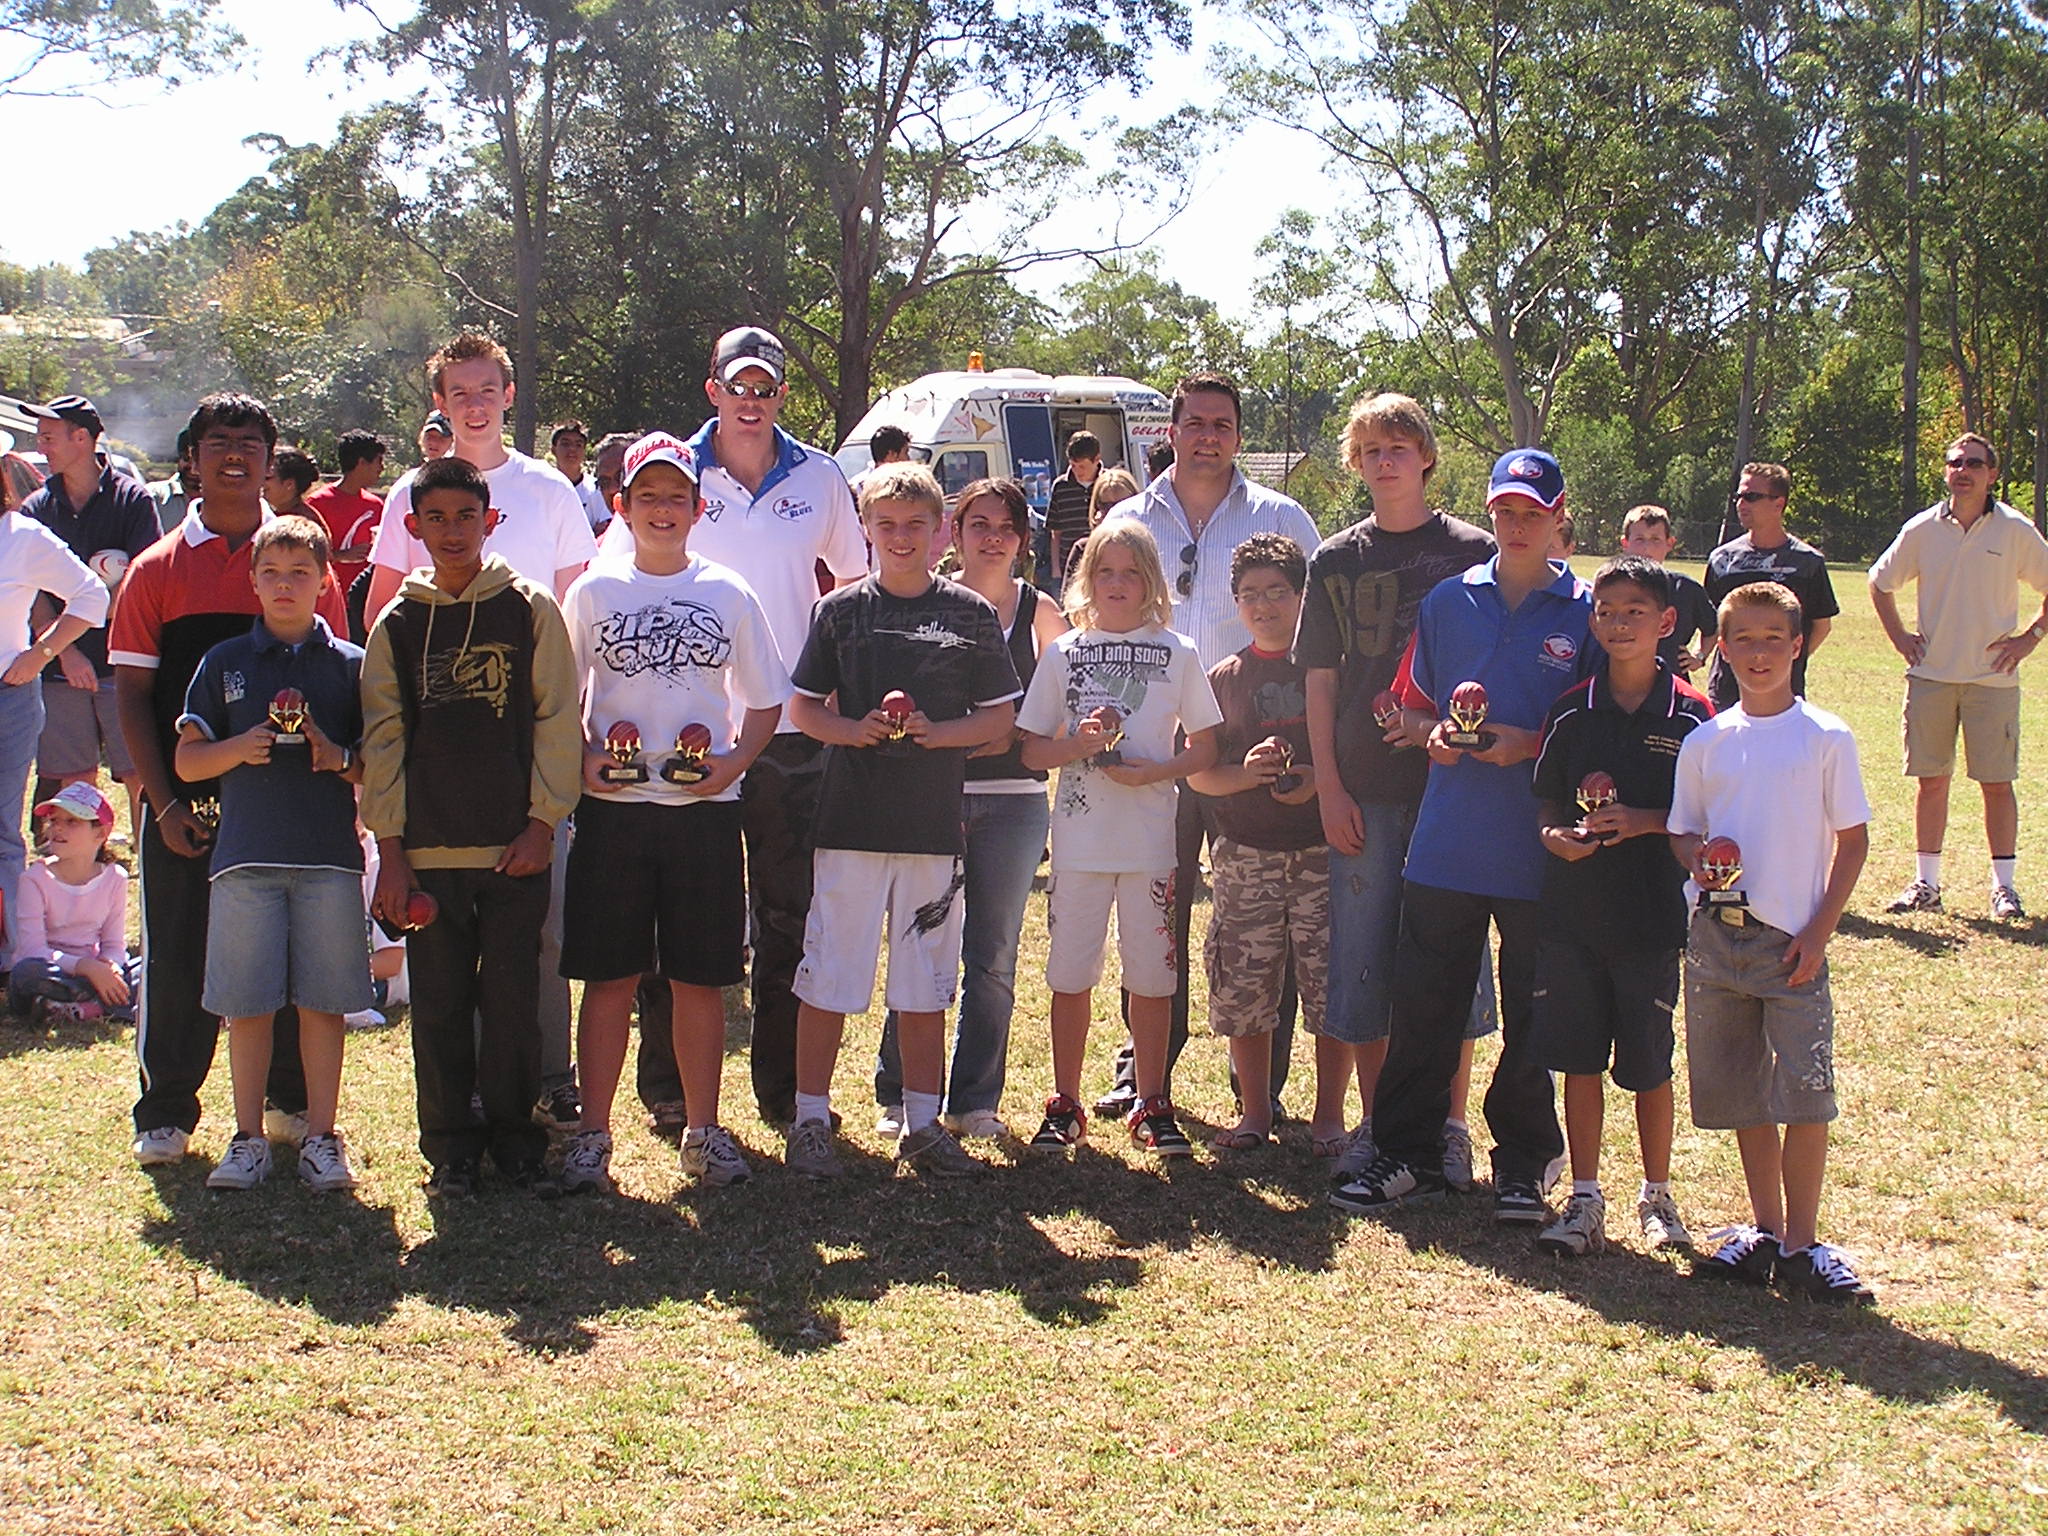 5 wickets in an innings - Juniors Presentation Day @ Campbell Park 19 March 2011.